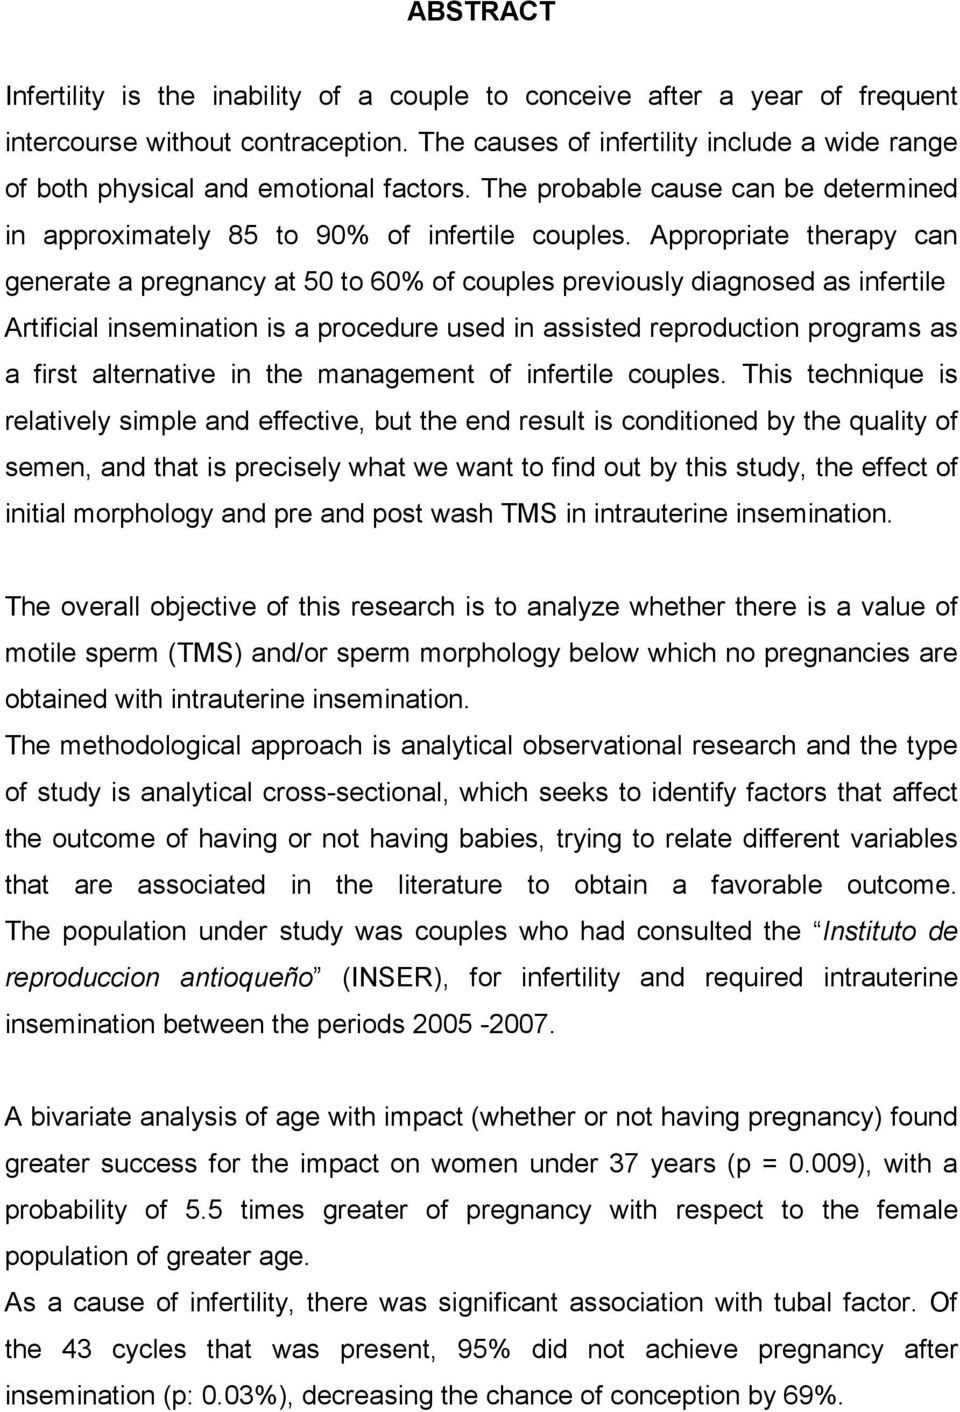 Appropriate therapy can generate a pregnancy at 50 to 60% of couples previously diagnosed as infertile Artificial insemination is a procedure used in assisted reproduction programs as a first